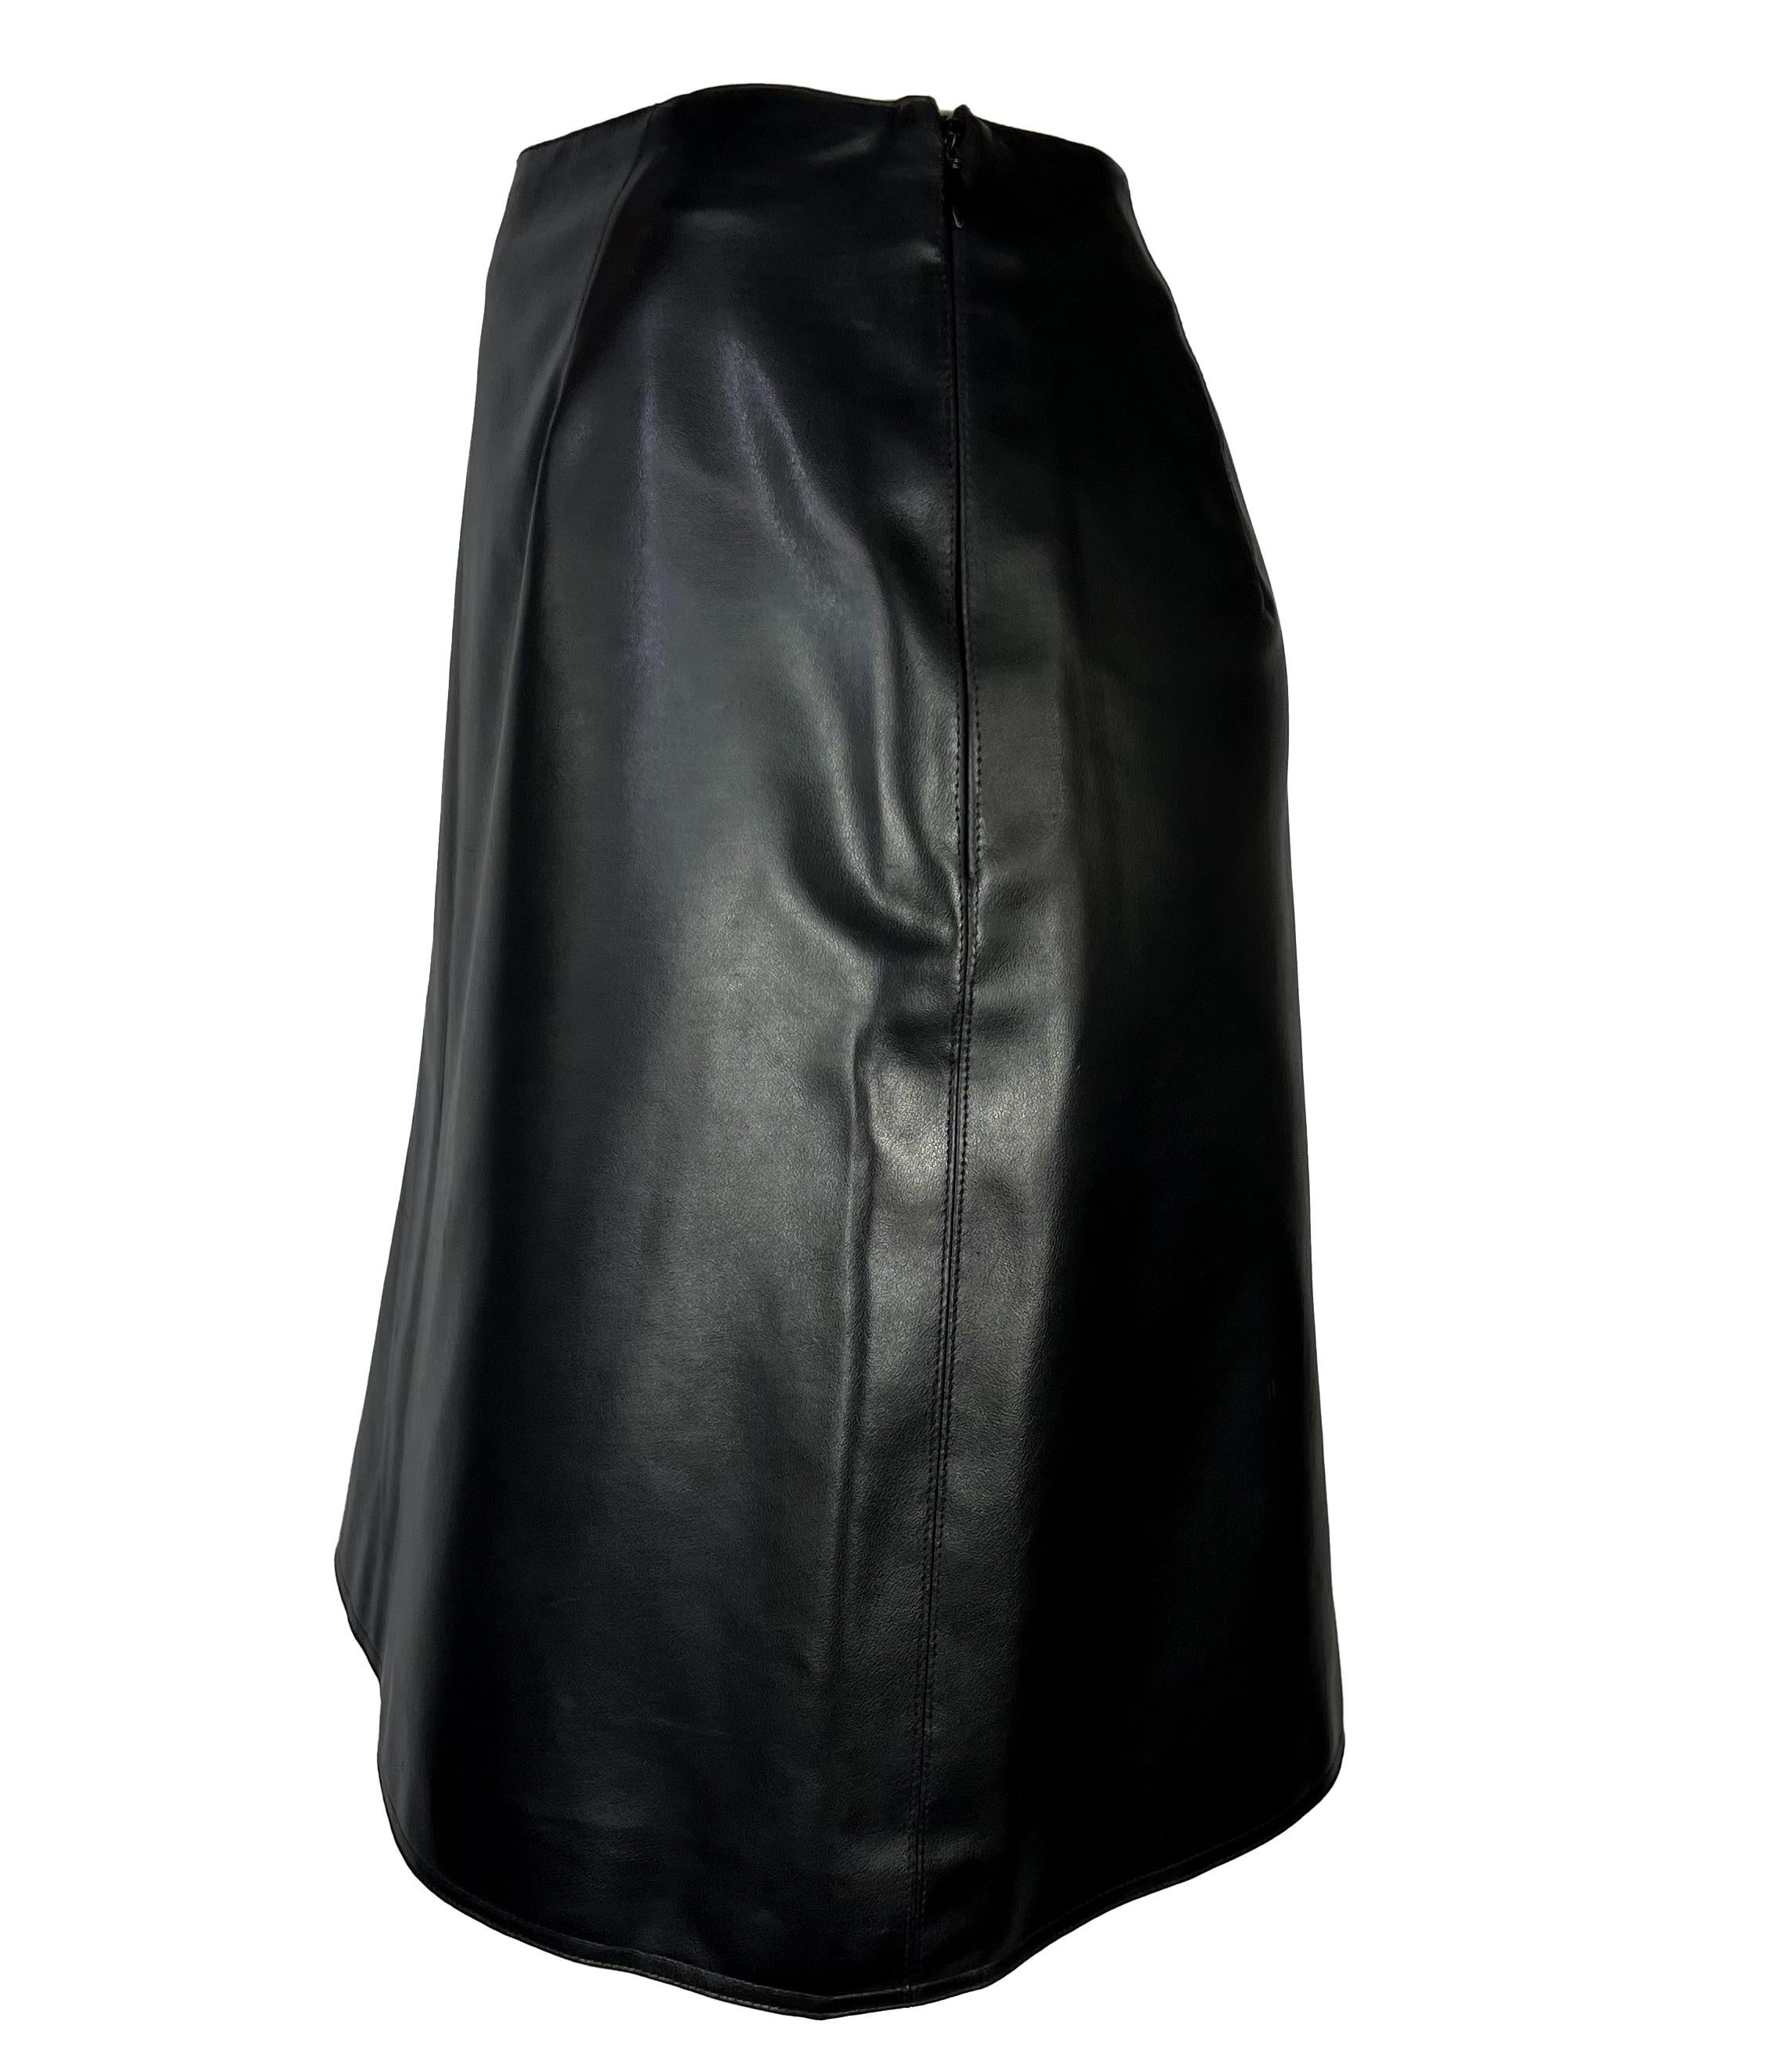 1996 Gianni Versace Couture Black Vegan Leather Mini Skirt In Good Condition For Sale In West Hollywood, CA